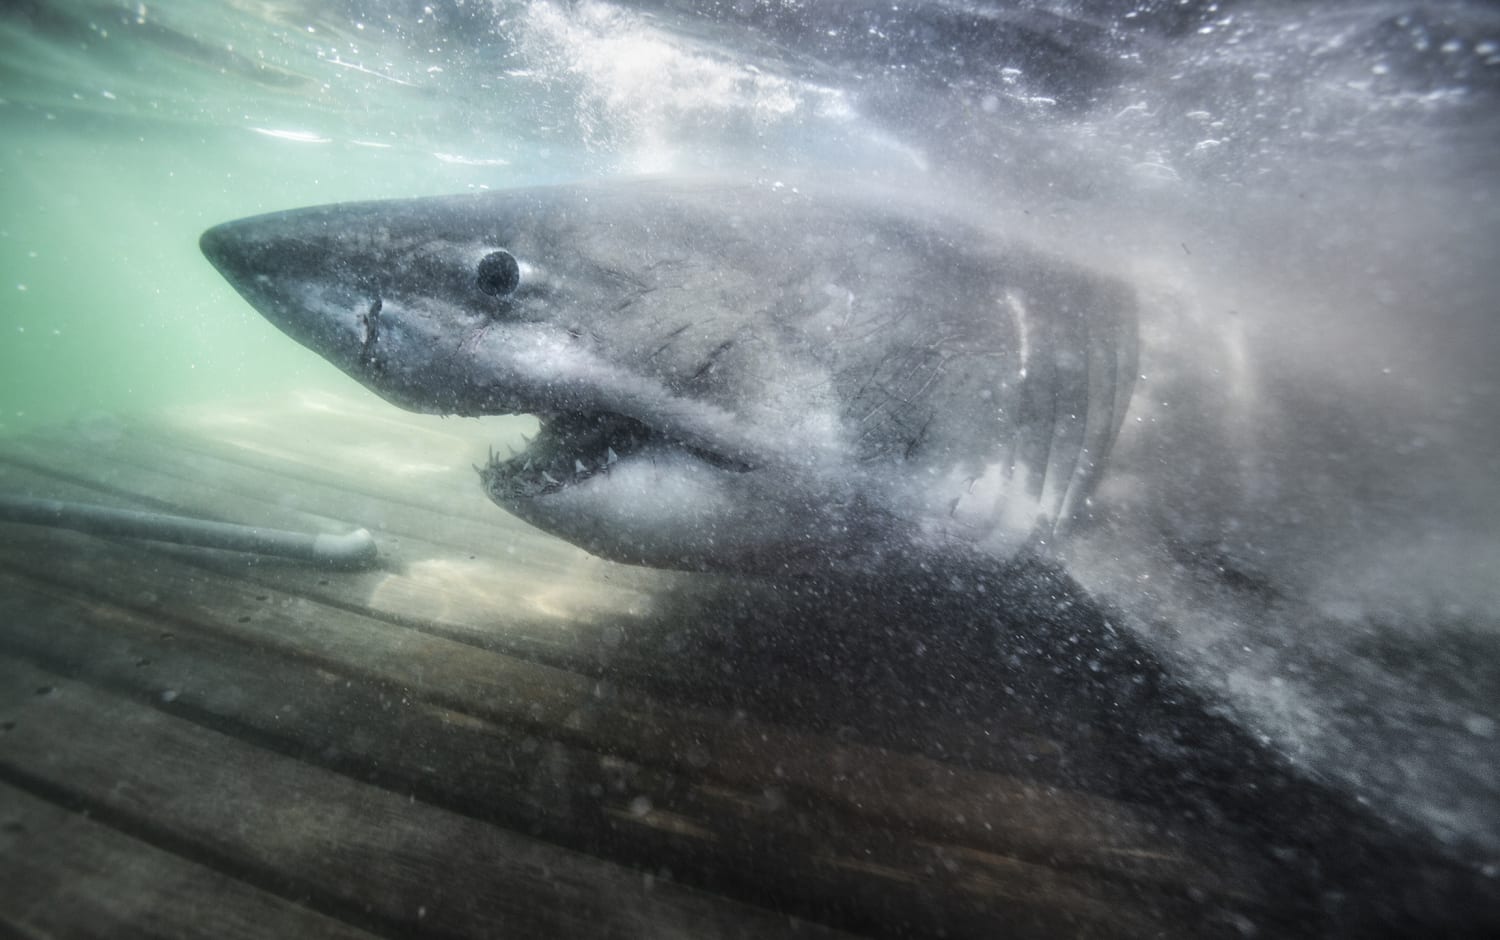 researchers-find-queen-of-the-ocean-ancient-great-white-shark-off-nova-scotia-coast